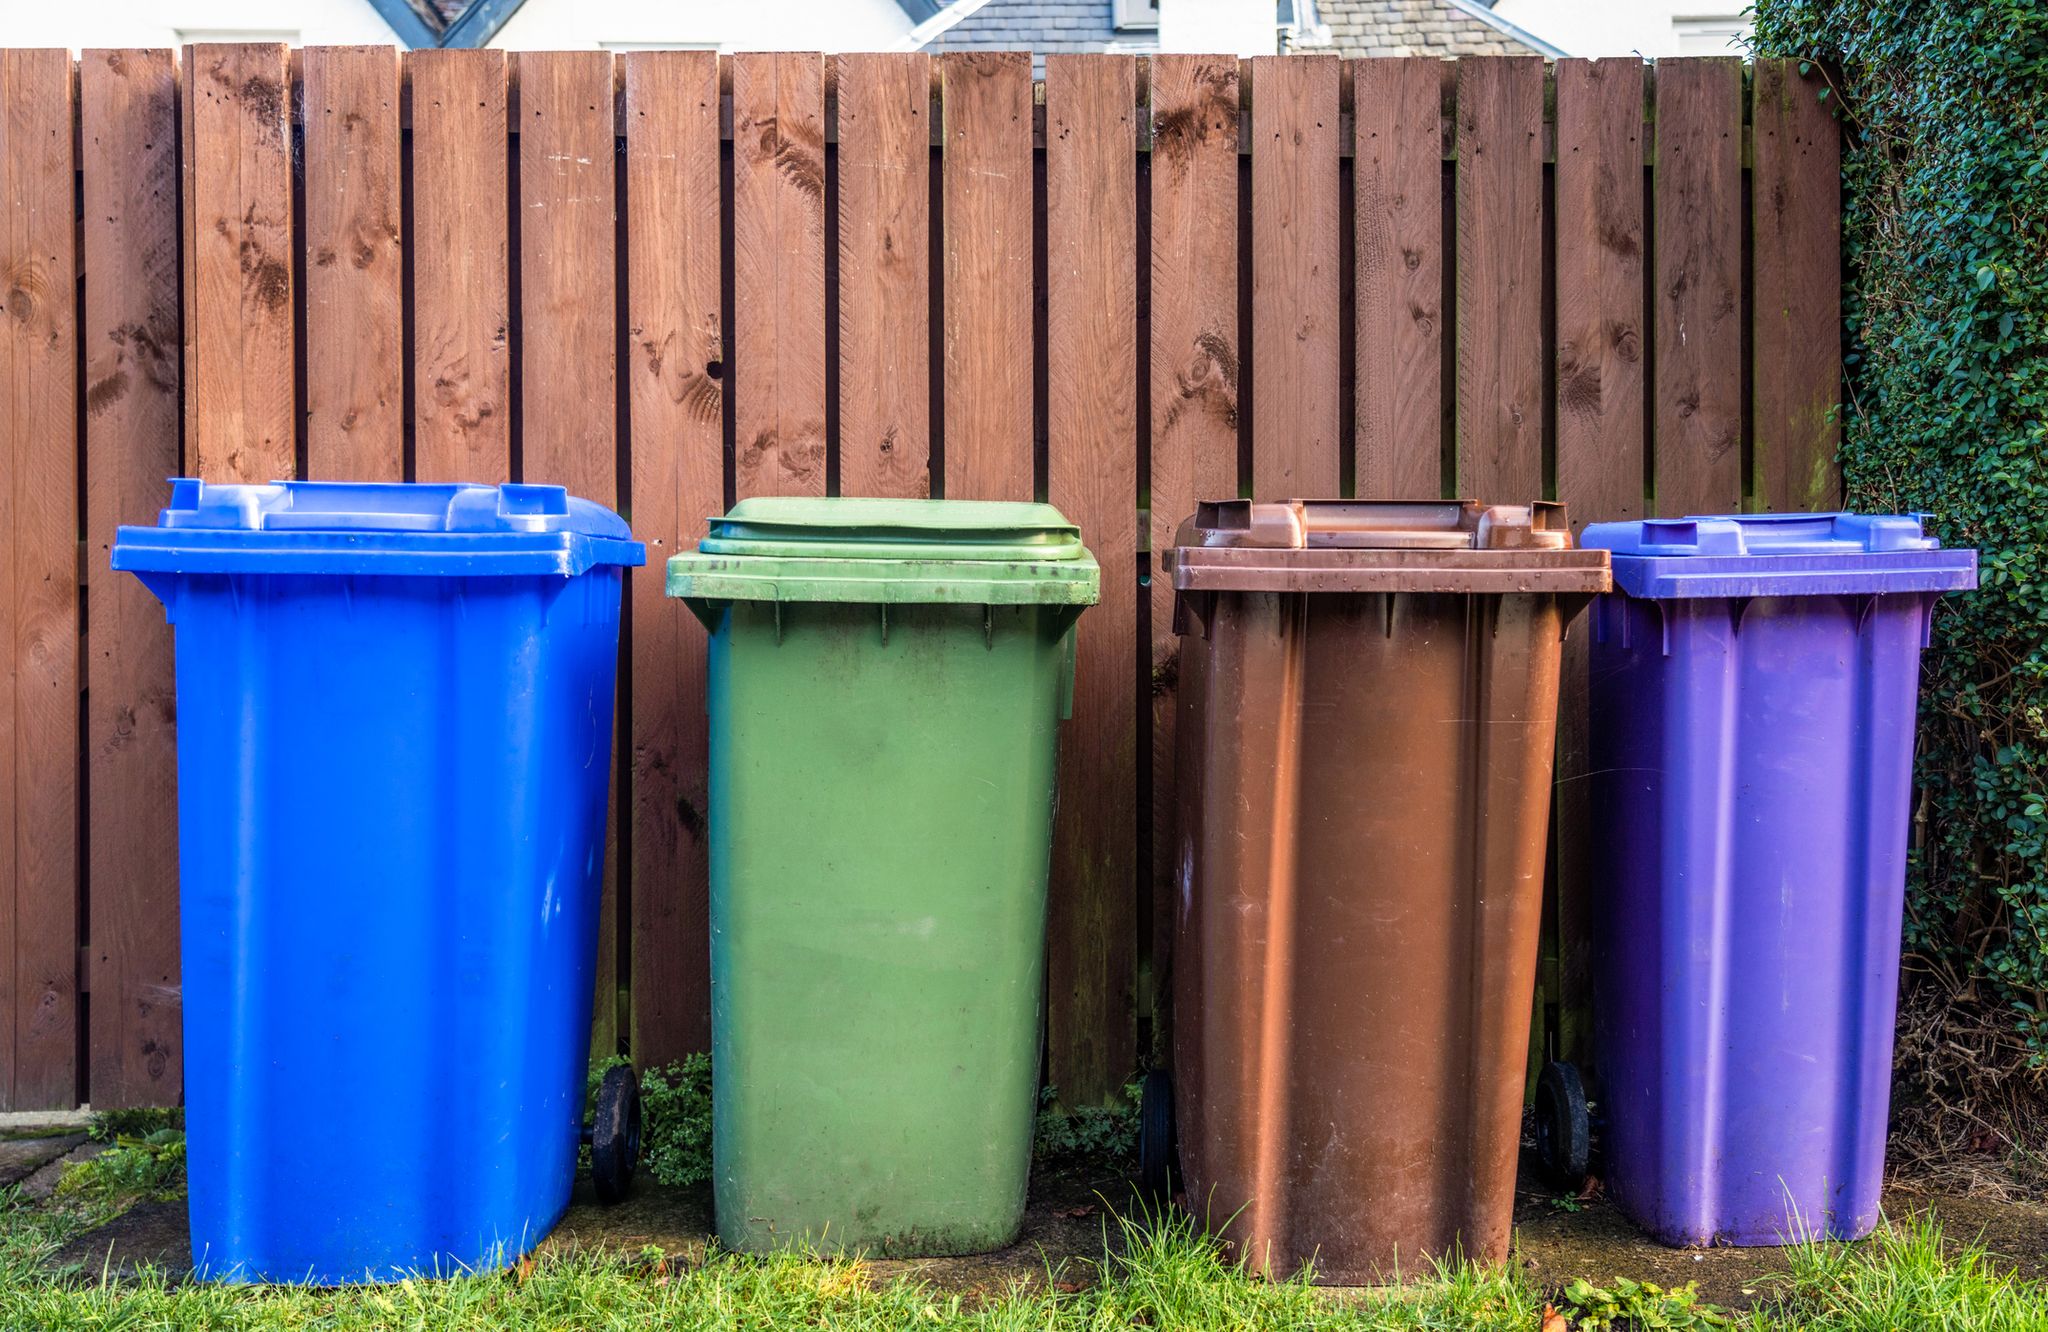 Bin Stores Near Me: How to Find A Bin Store, And A Growing List